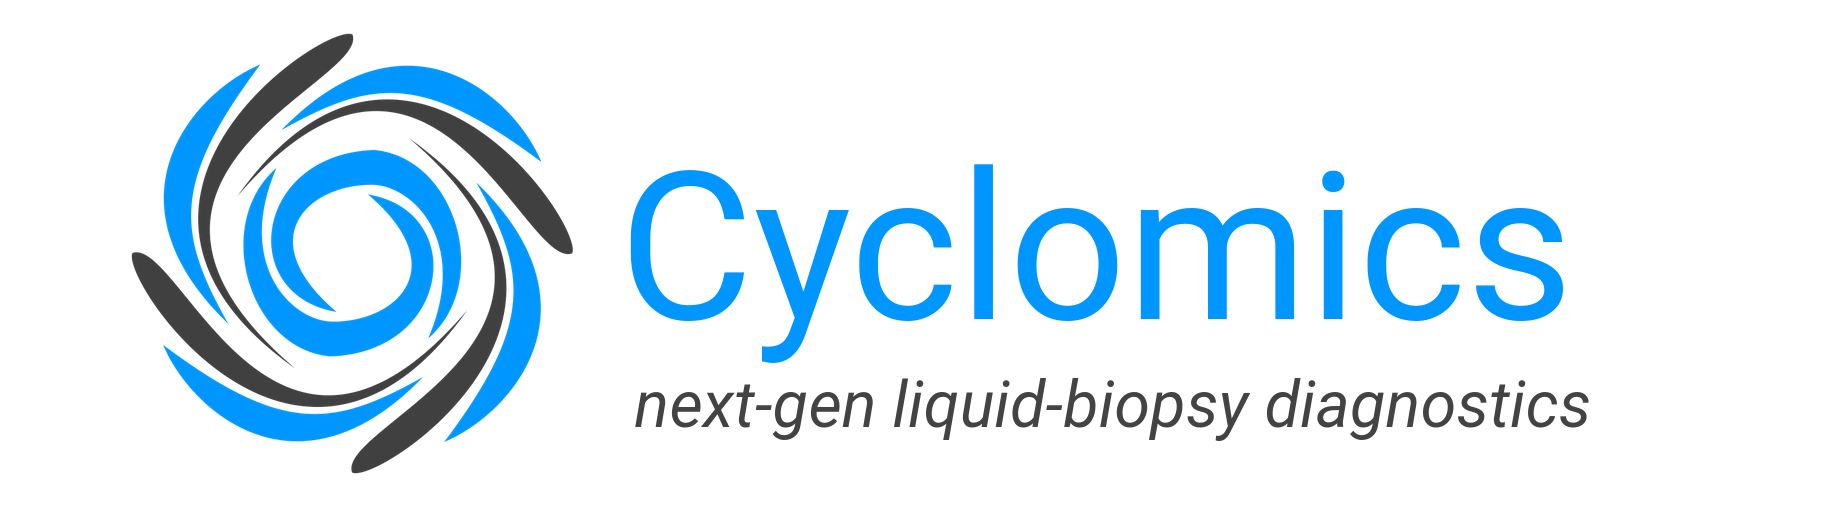 Cyclomics announces completion of seed financing round